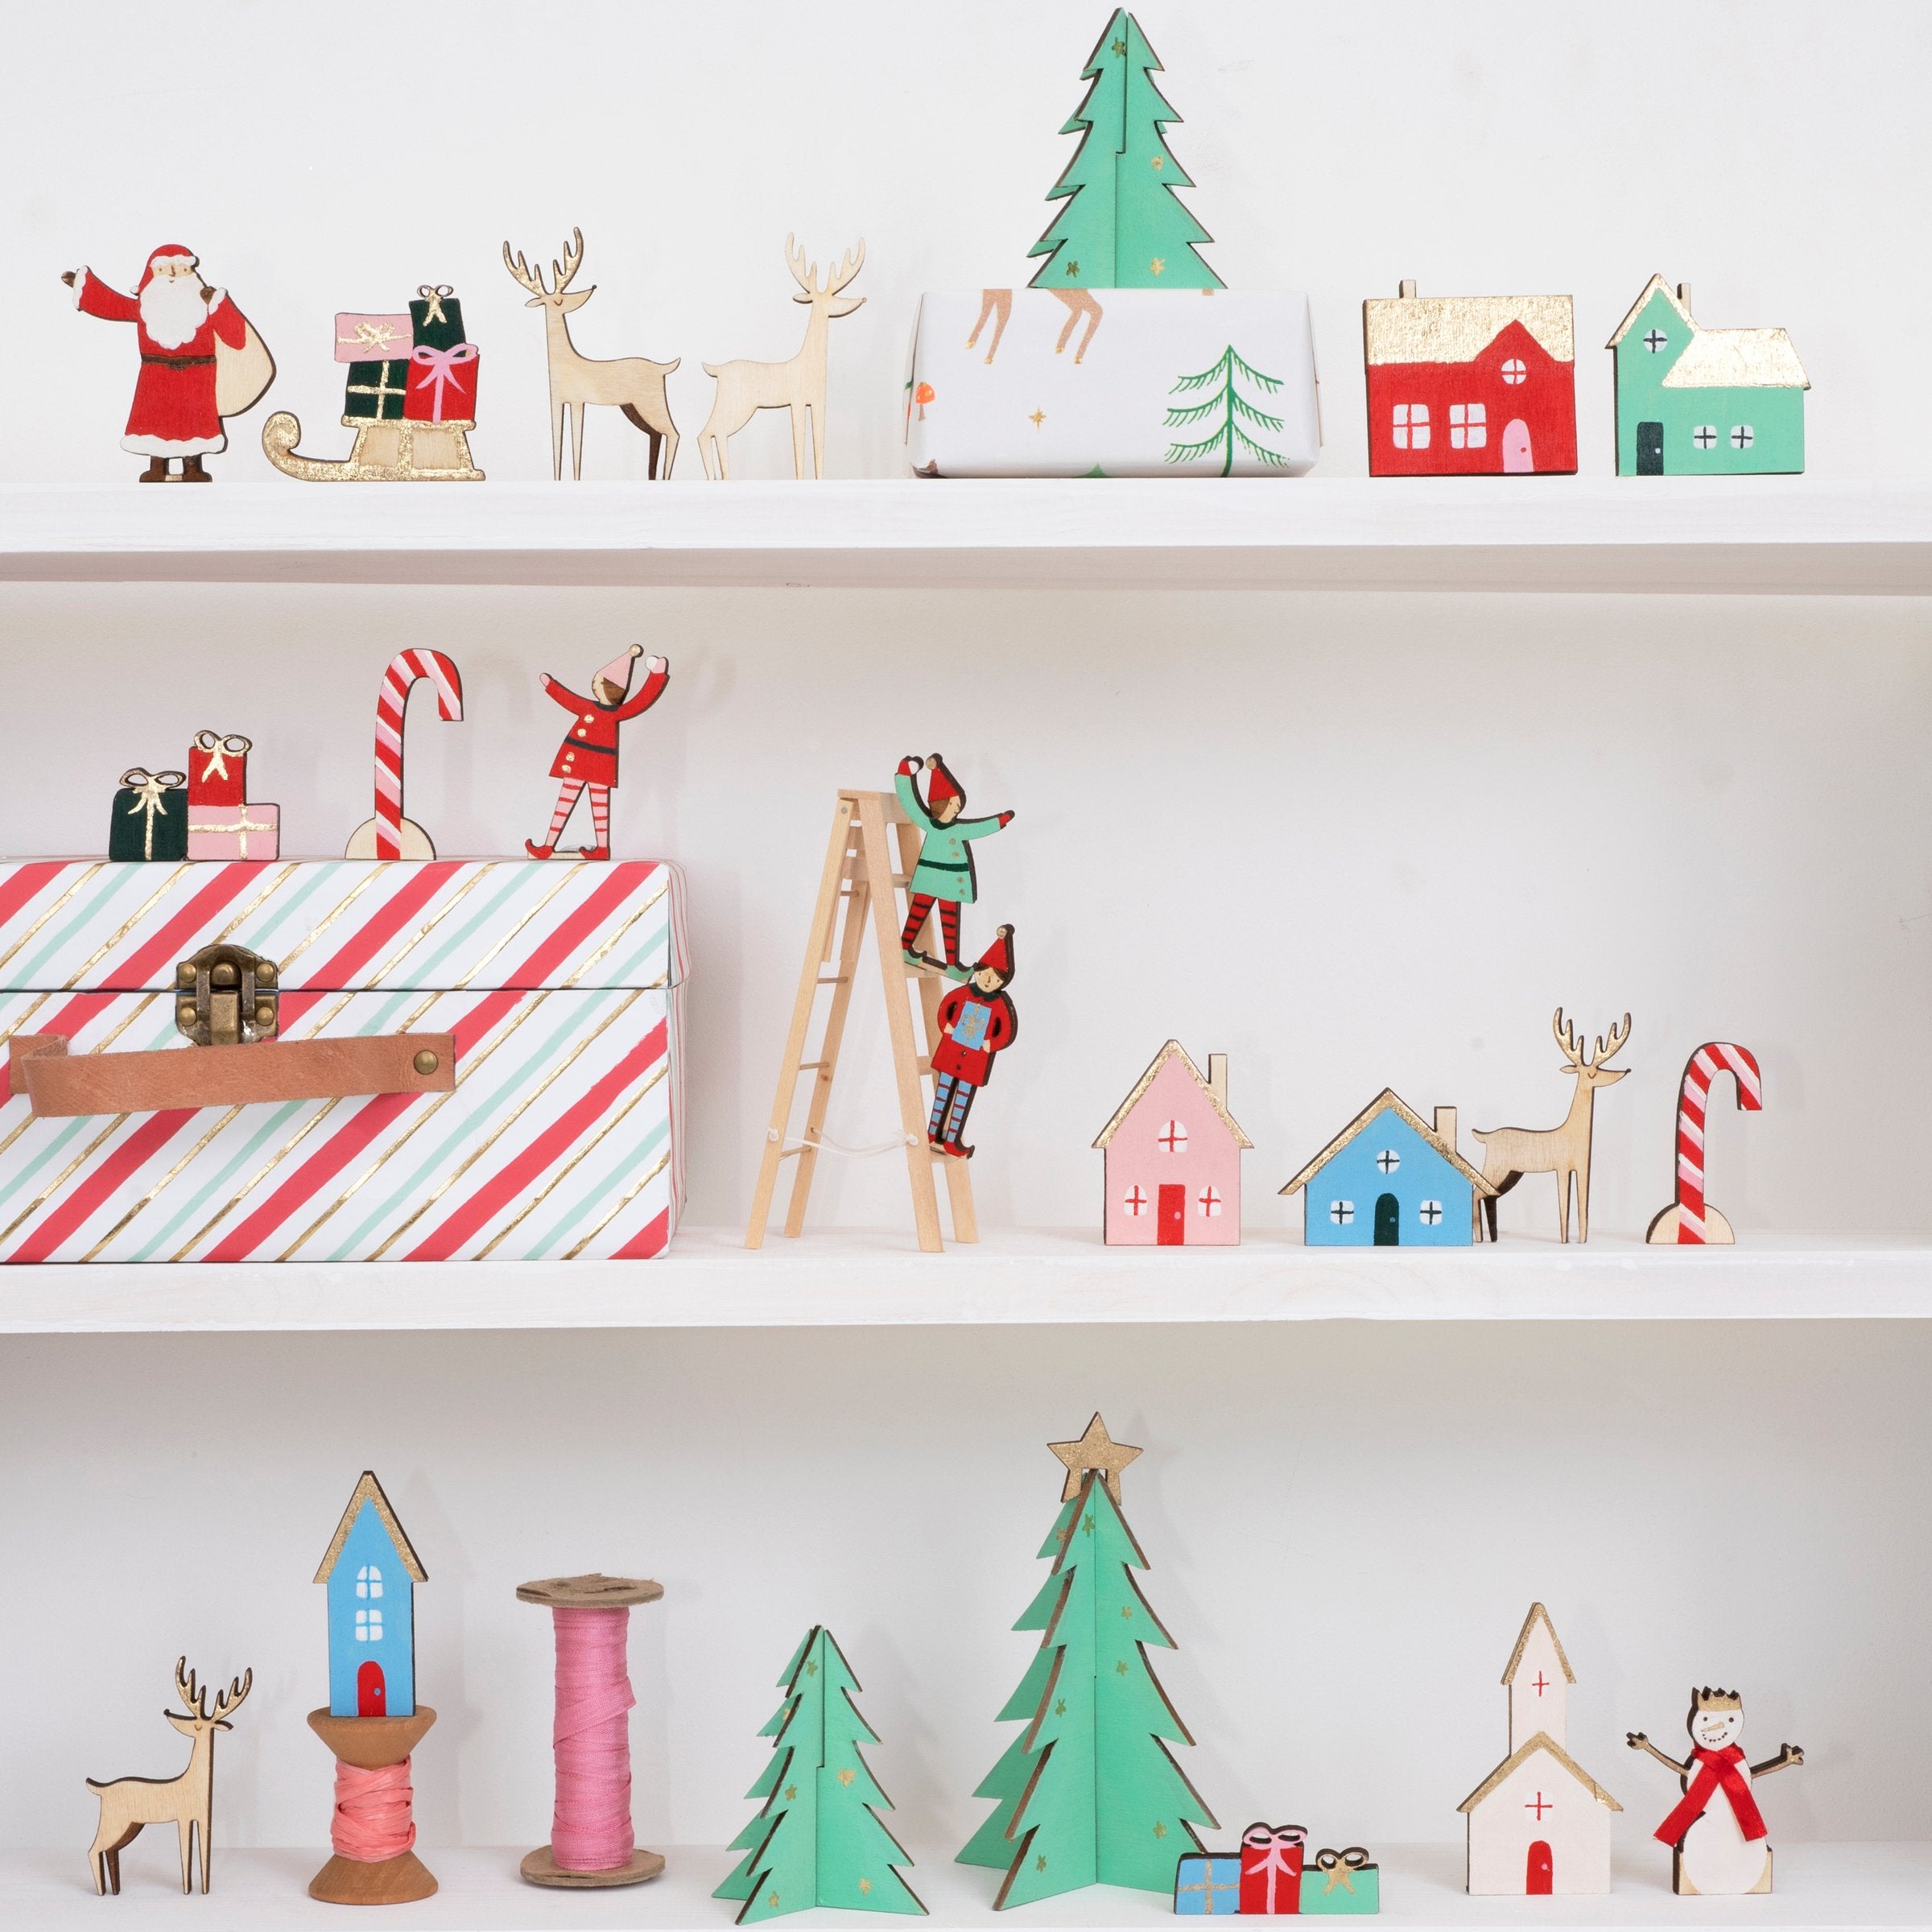 Build a Christmas village scene with our wooden advent calendar, to create a beautiful wooden Christmas decoration.